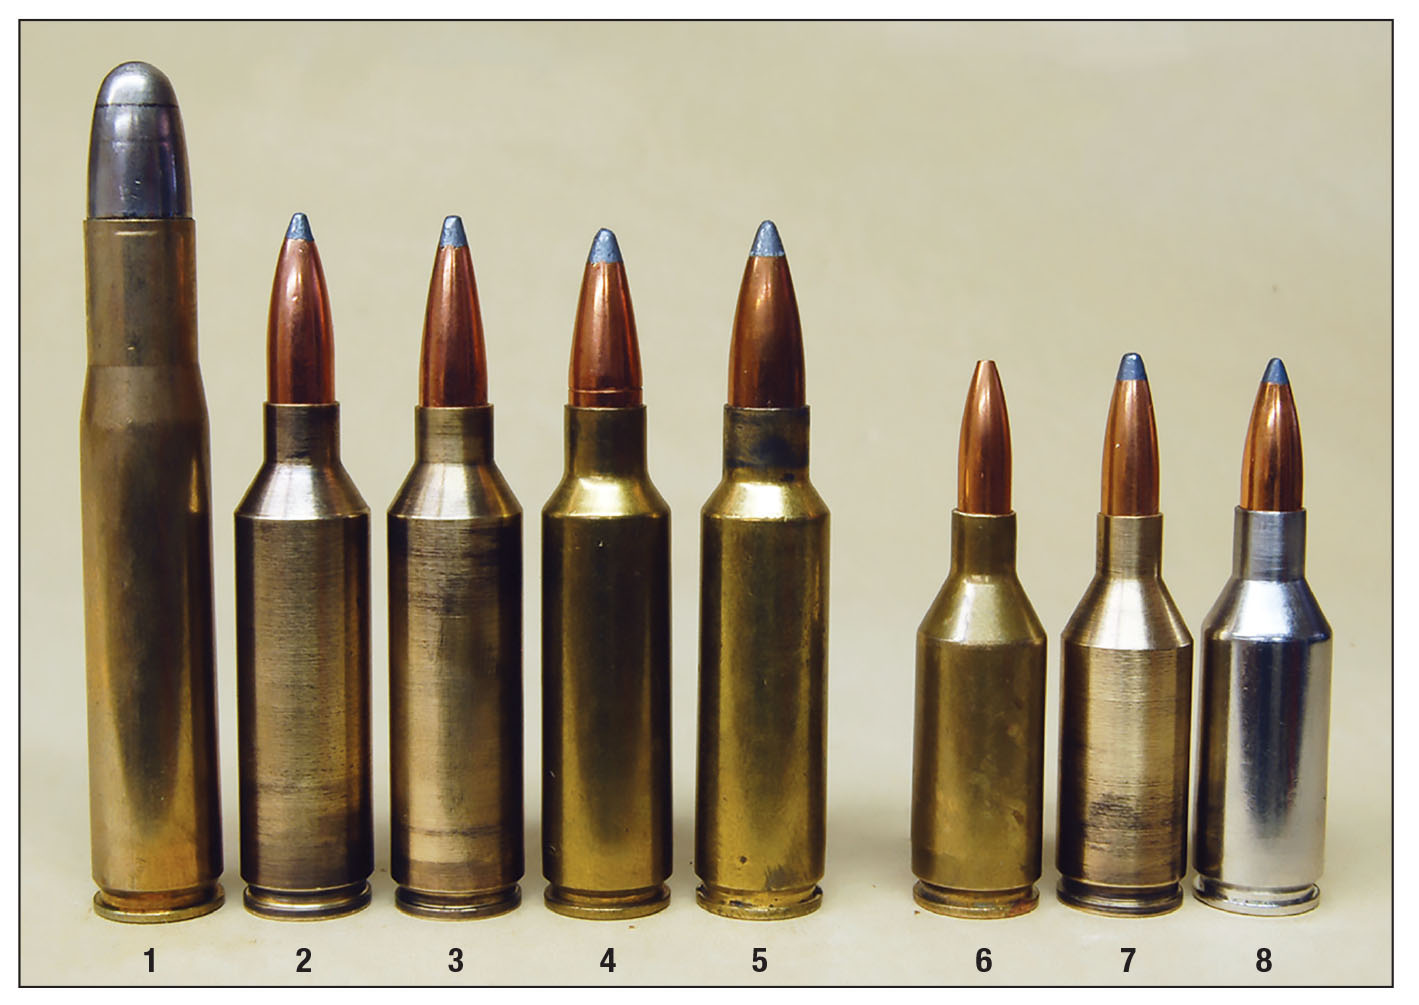 For Winchester, the (1) 404 Jeffrey case has so far produced the (2) 270 WSM, (3) 7mm WSM, (4) 300 WSM, (5) 325 WSM, (6) 22 WSSM, (7) 243 WSSM and (8) 25 WSSM. Will it ever end?